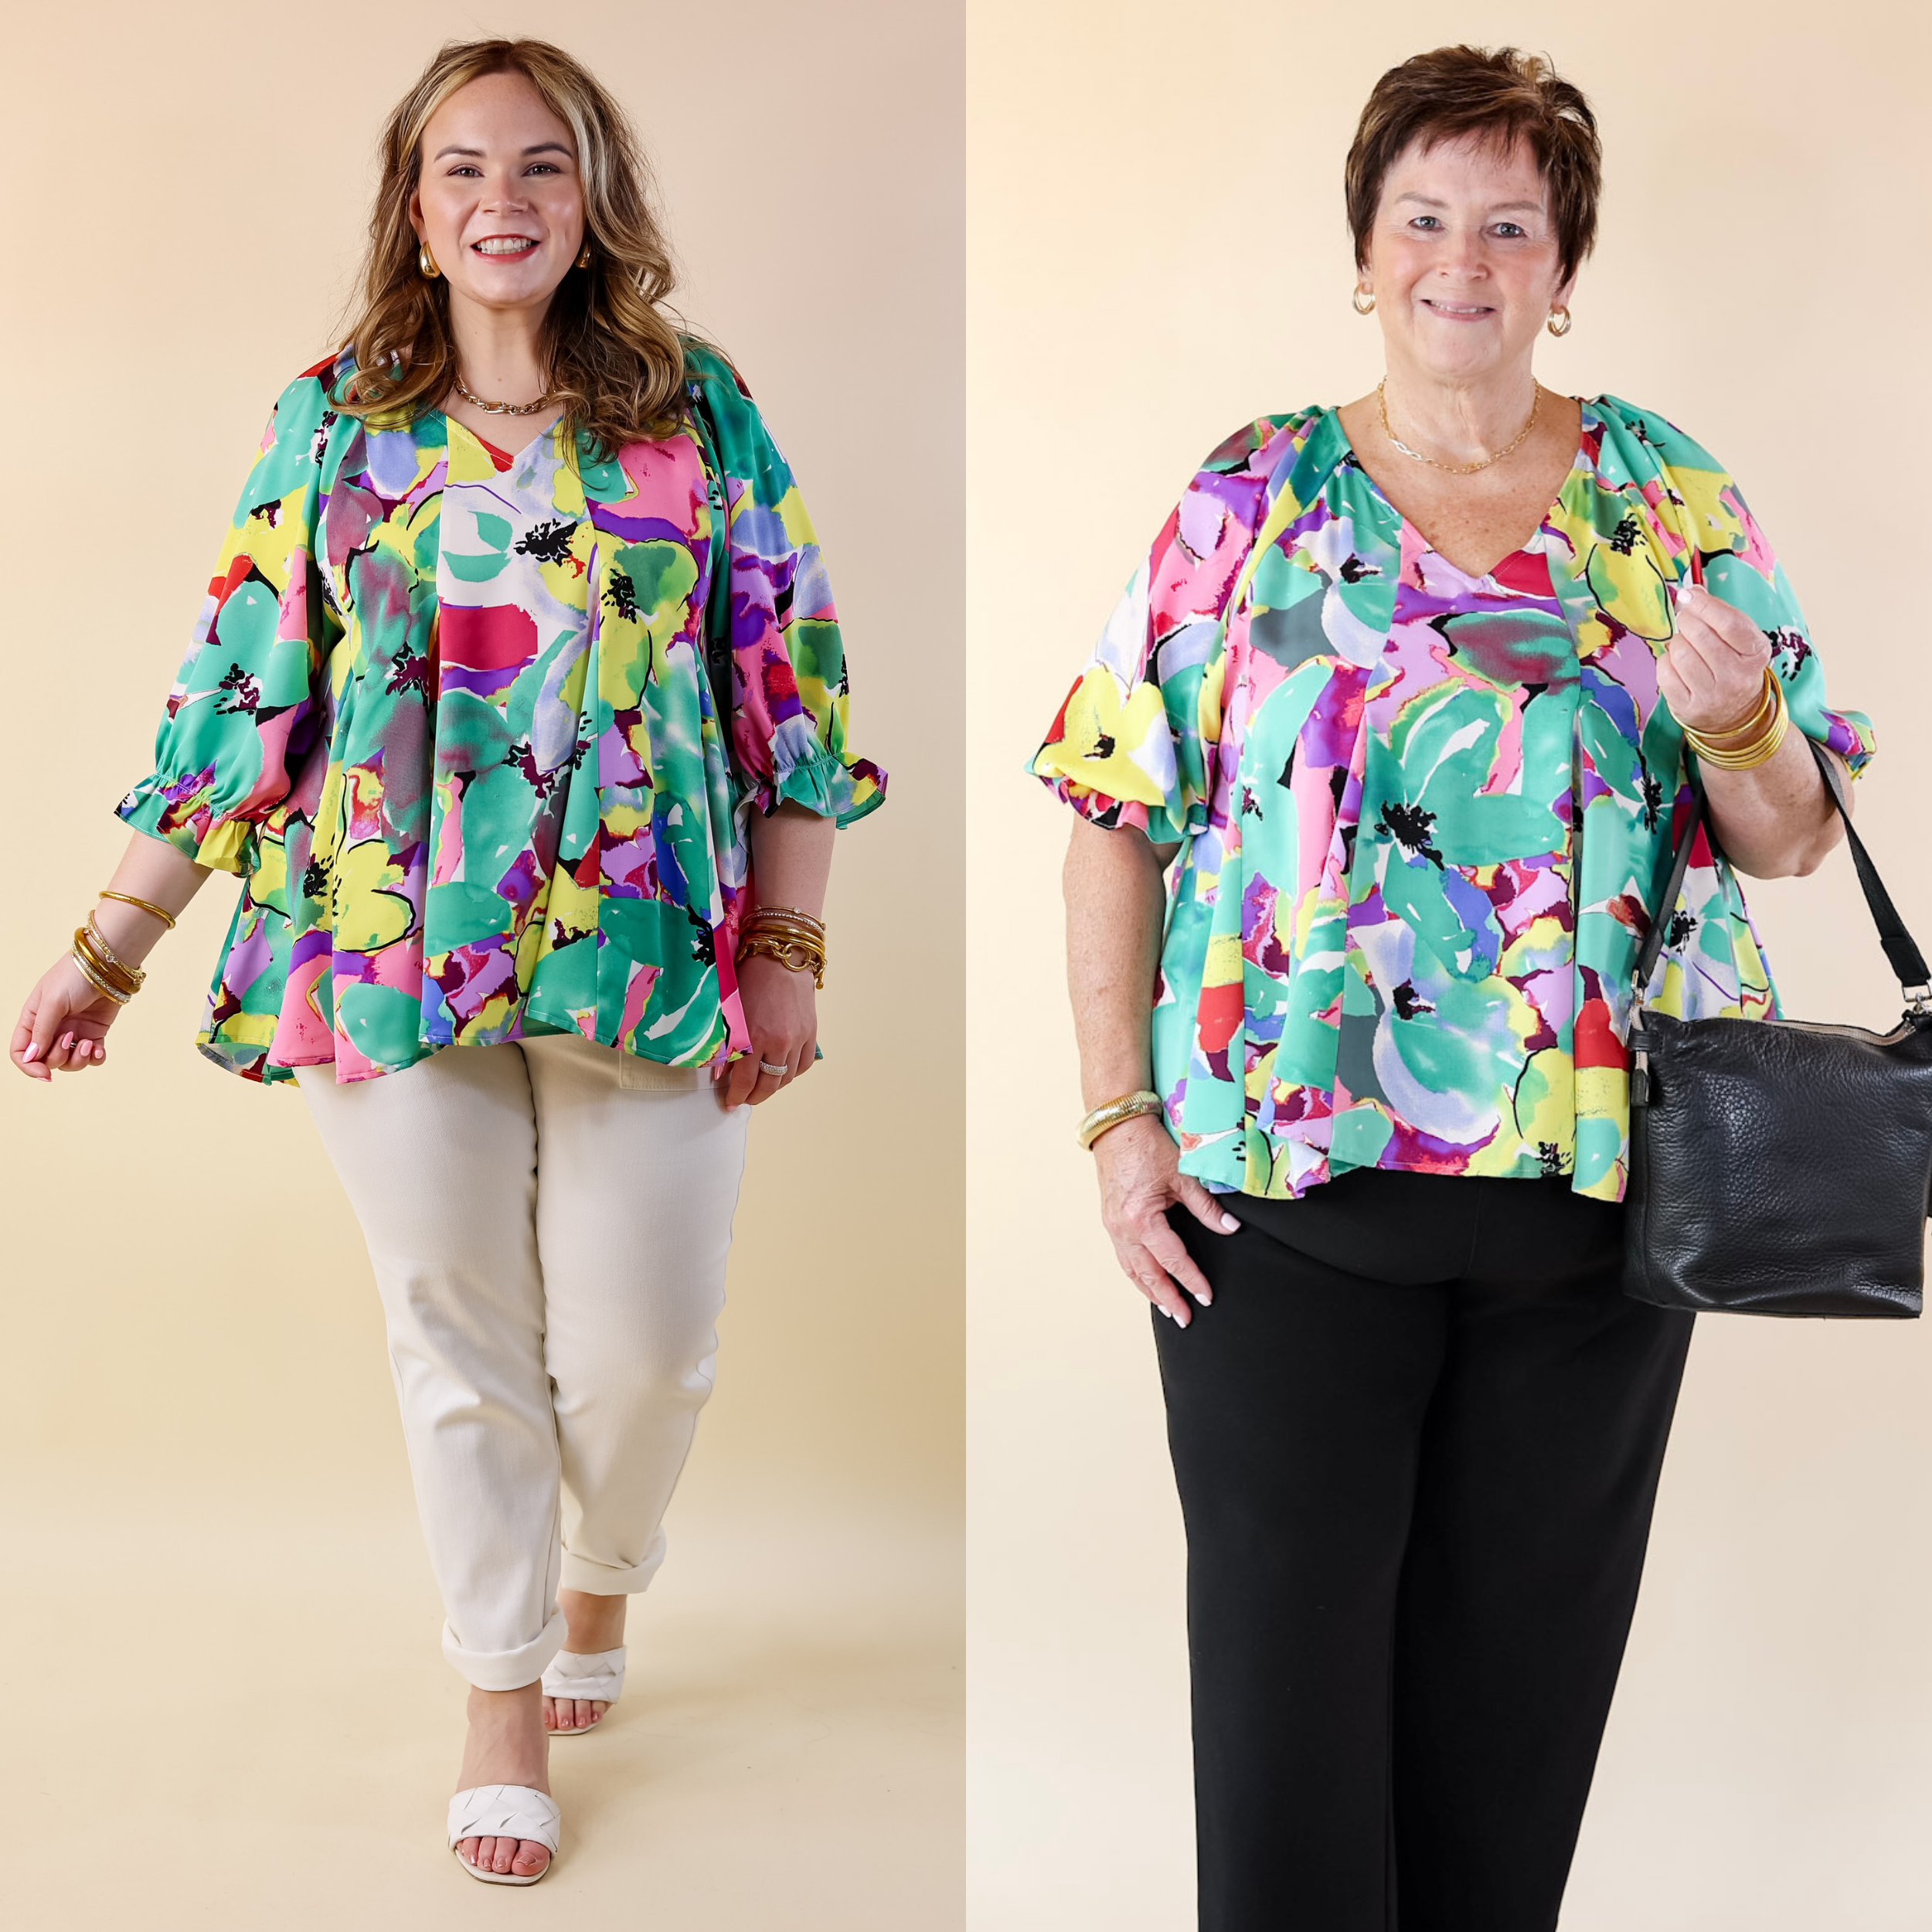 Blooming Love Floral V Neck Top with Half Sleeves in Green Mix - Giddy Up Glamour Boutique